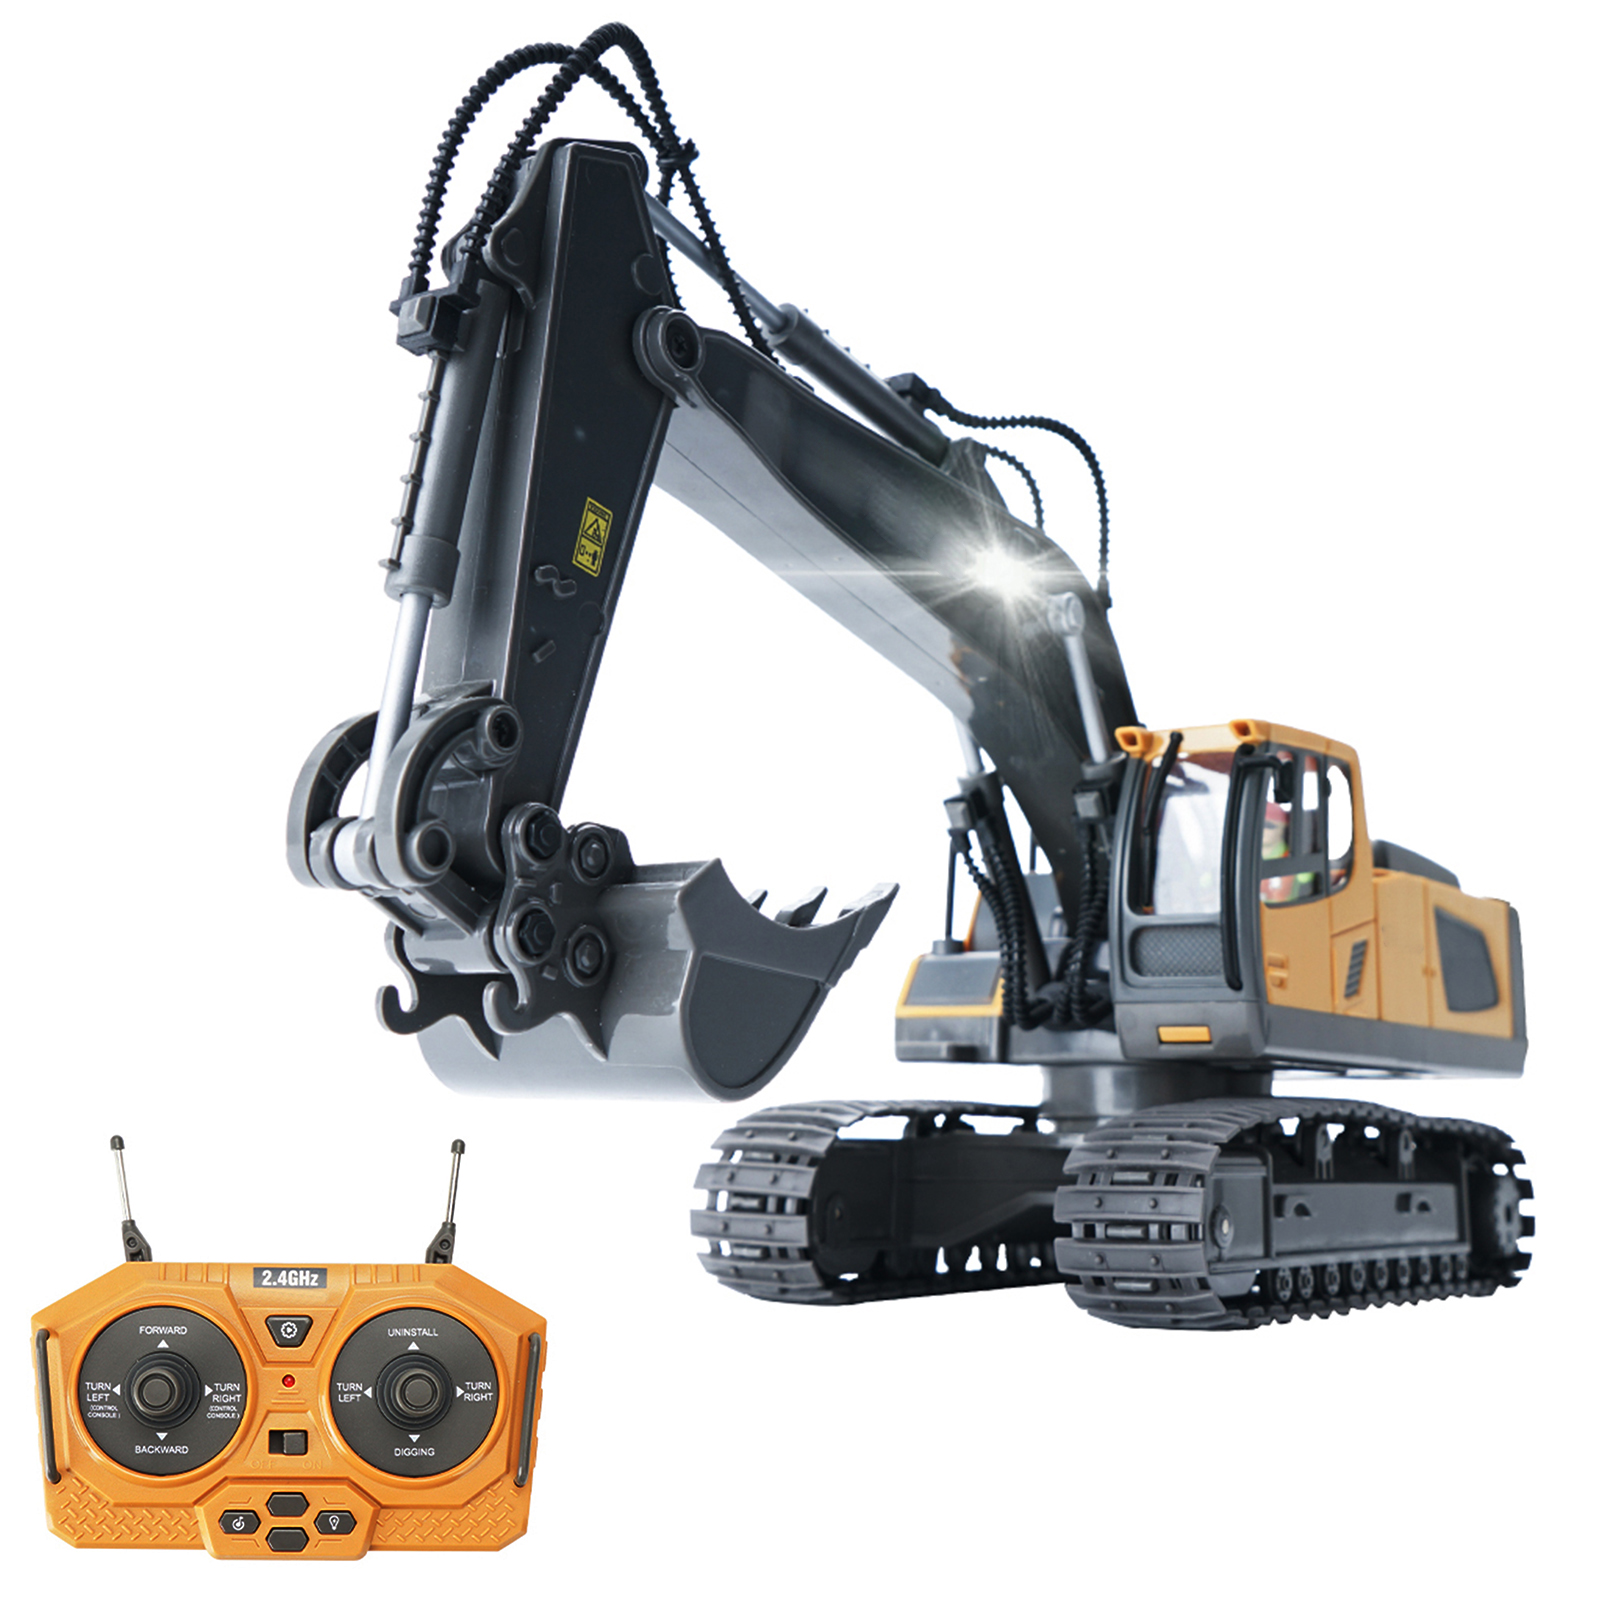 RC Excavator/Bulldozer 1/20 2.4GHz 11CH RC Construction Truck Engineering Vehicles Educational Toys for Kids with Light MusicOrigin:China,Type:white